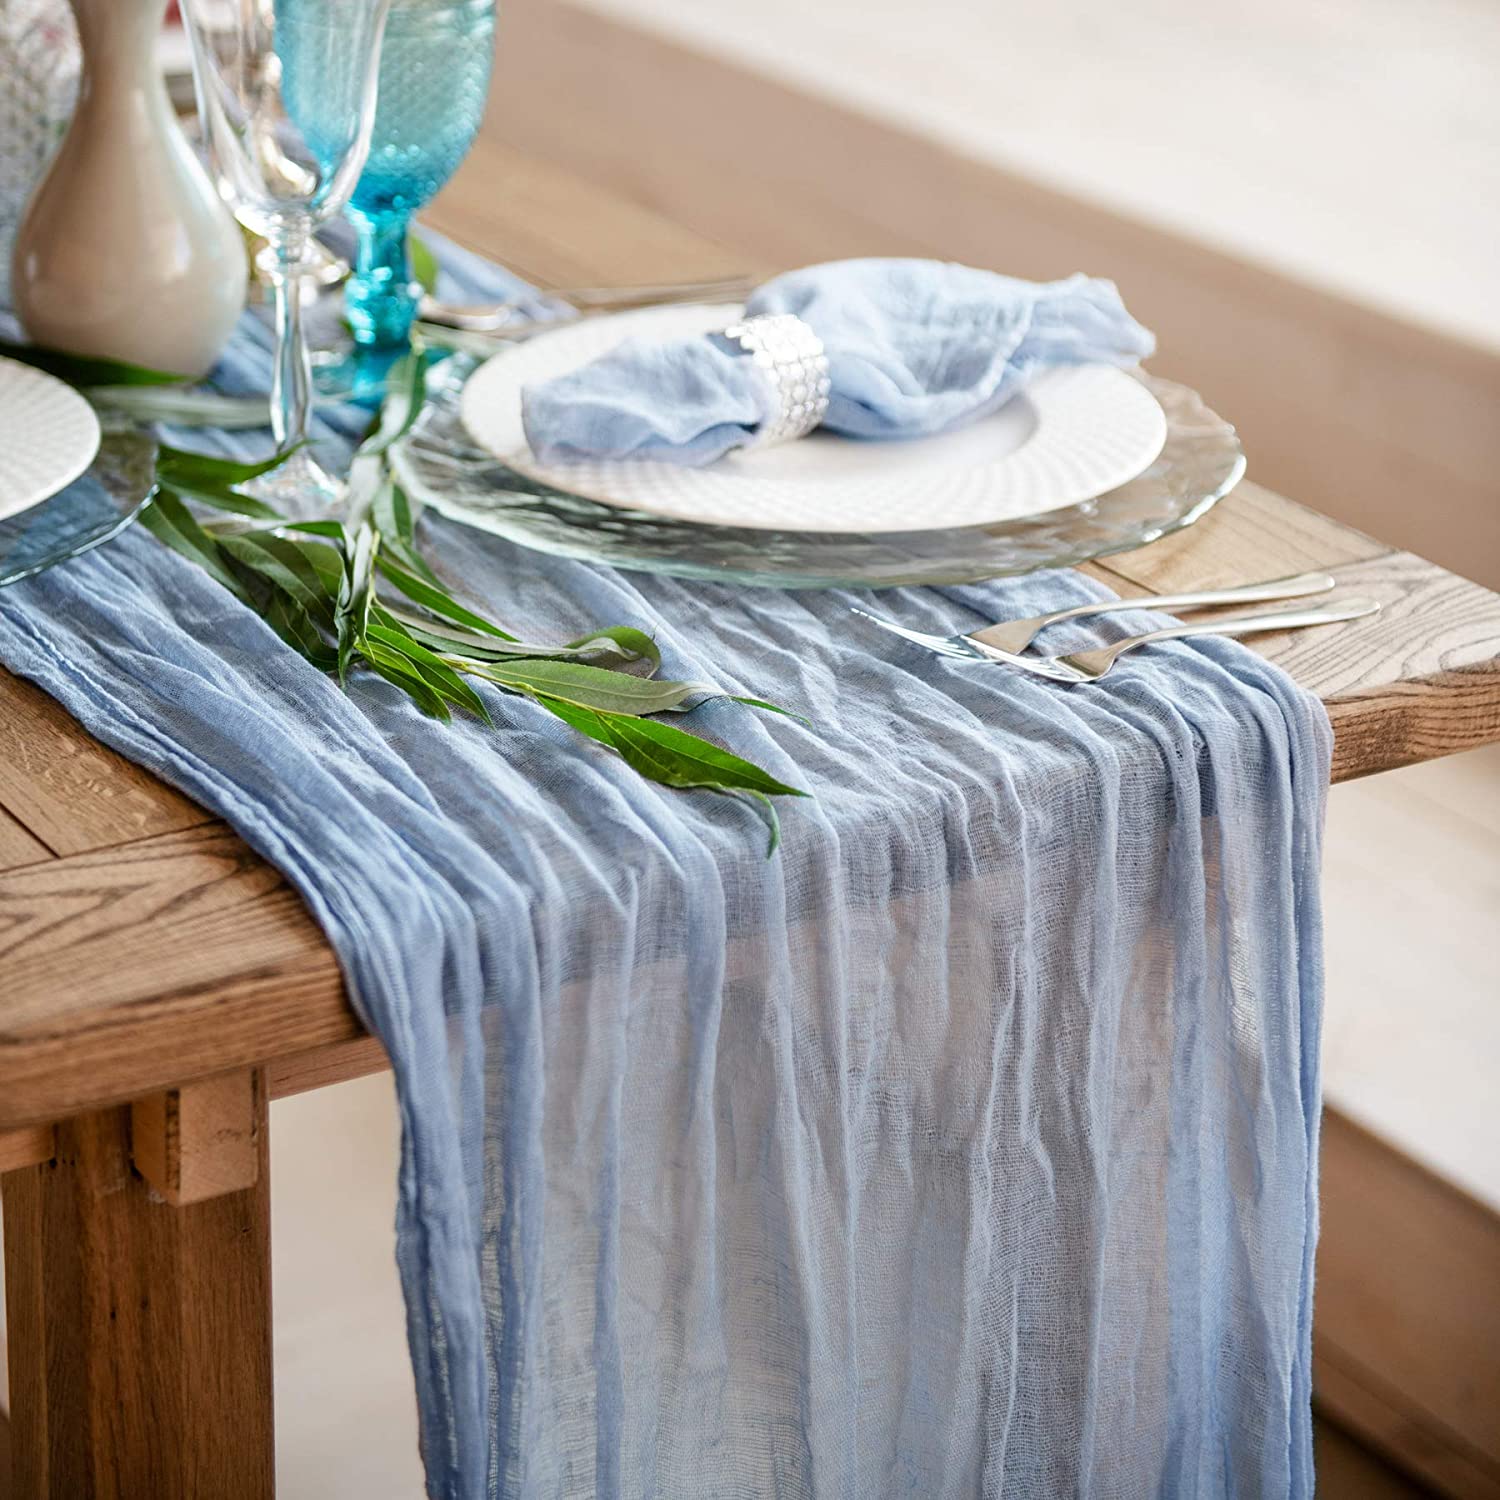 Wedding Reception table runner made of sea blue cheesecloth. On the runner is a table dinner setting and an assortment of glasses can be seen nearby.